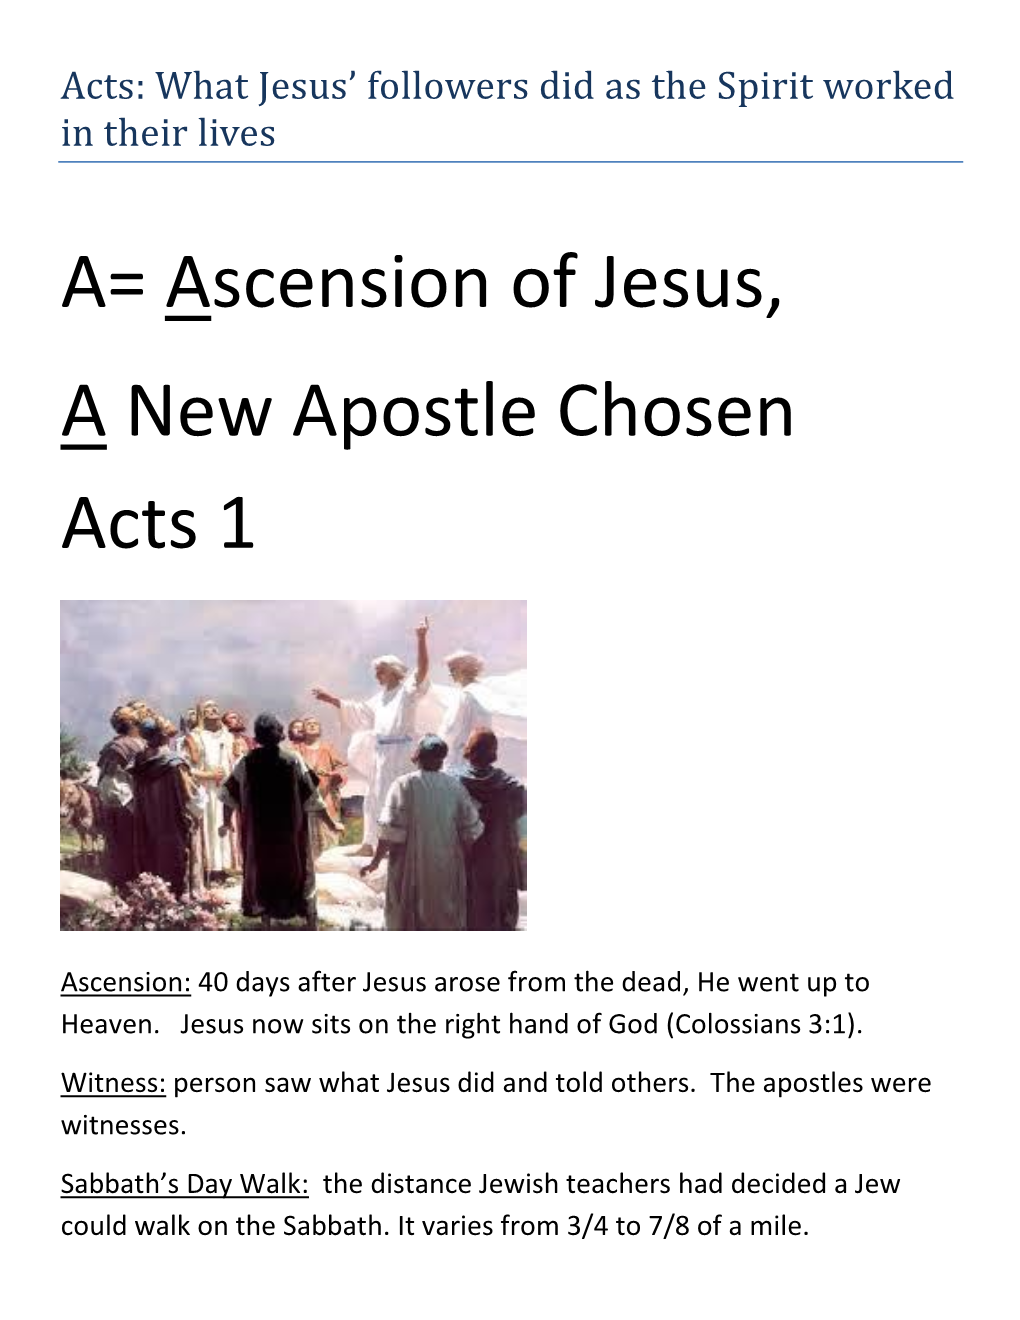 A= Ascension of Jesus, a New Apostle Chosen Acts 1